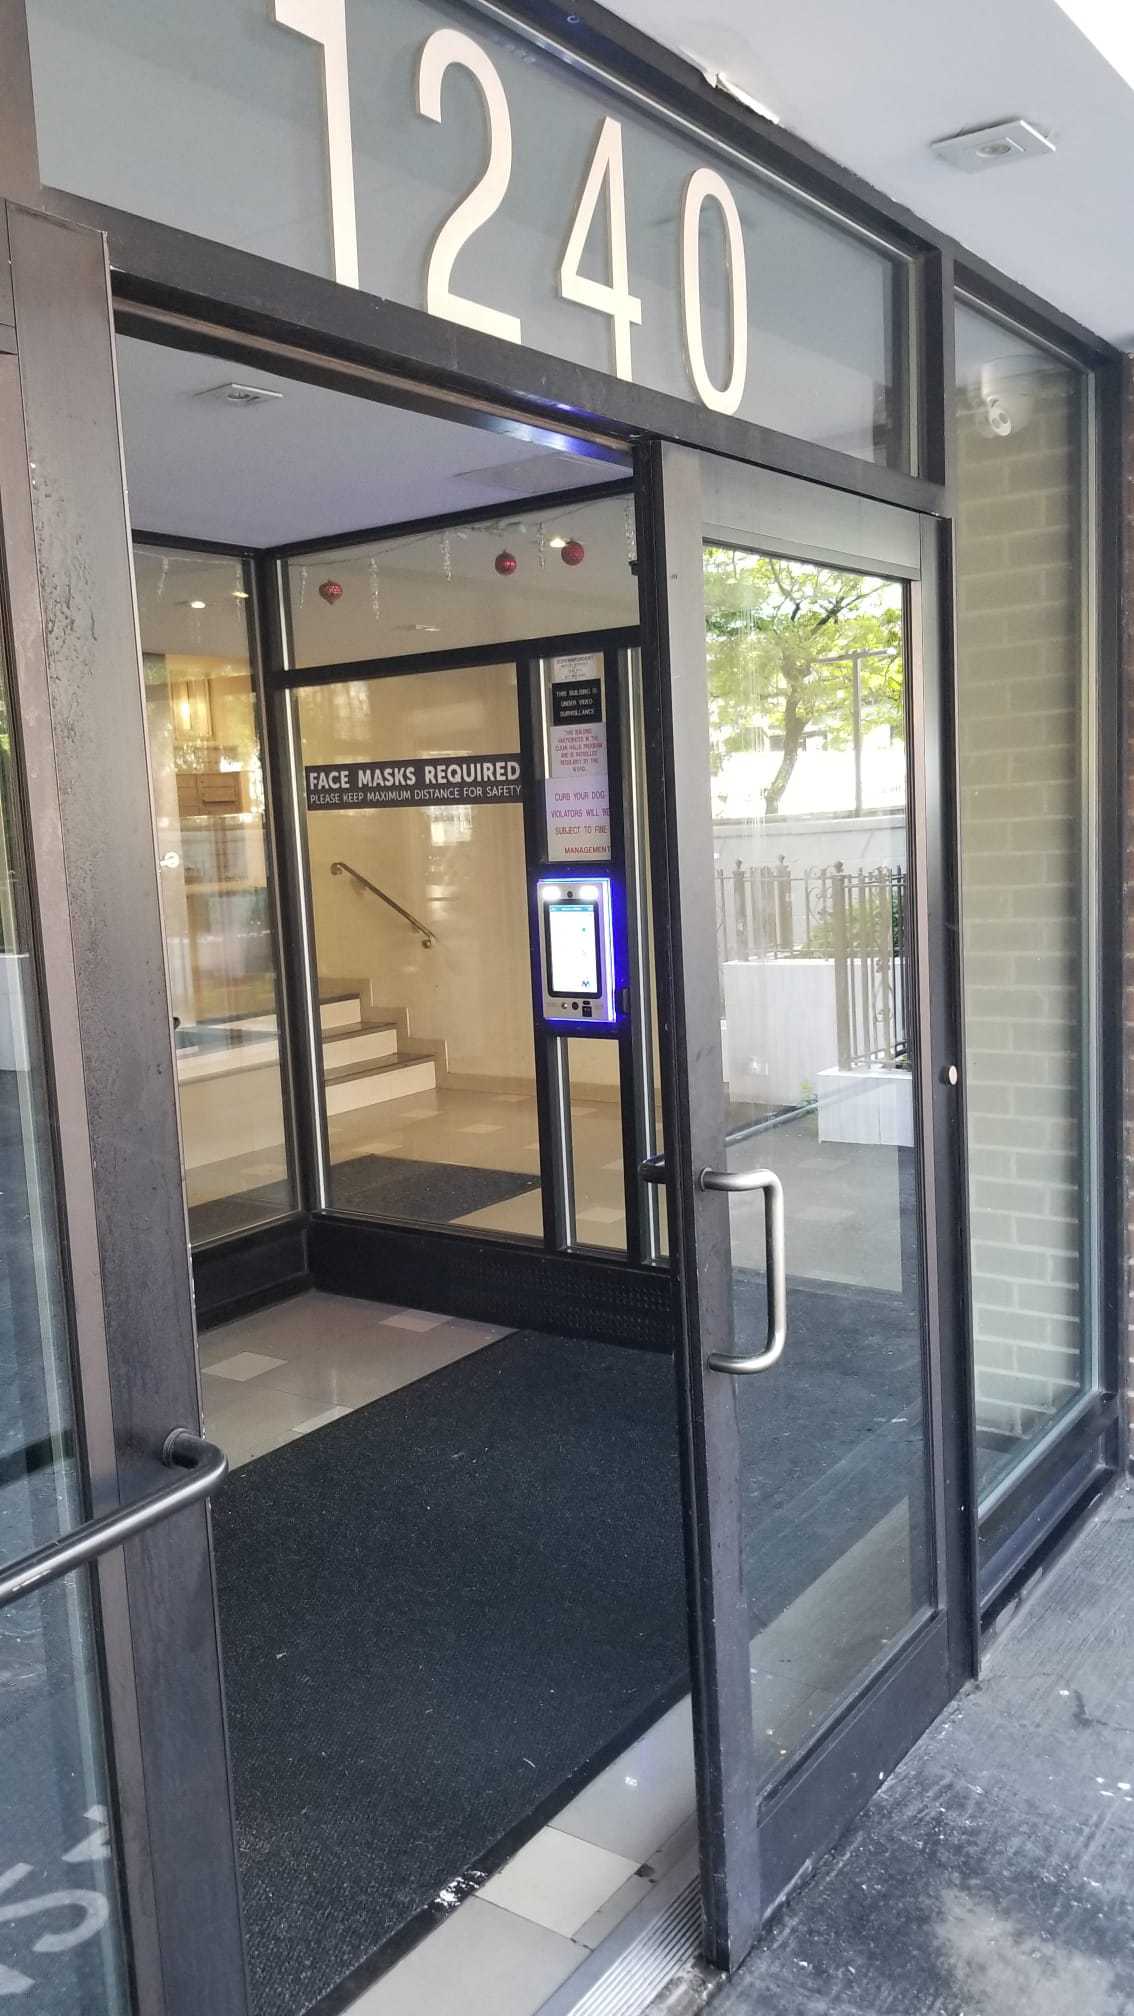 mvi keycom mounted on wall by office building entrance